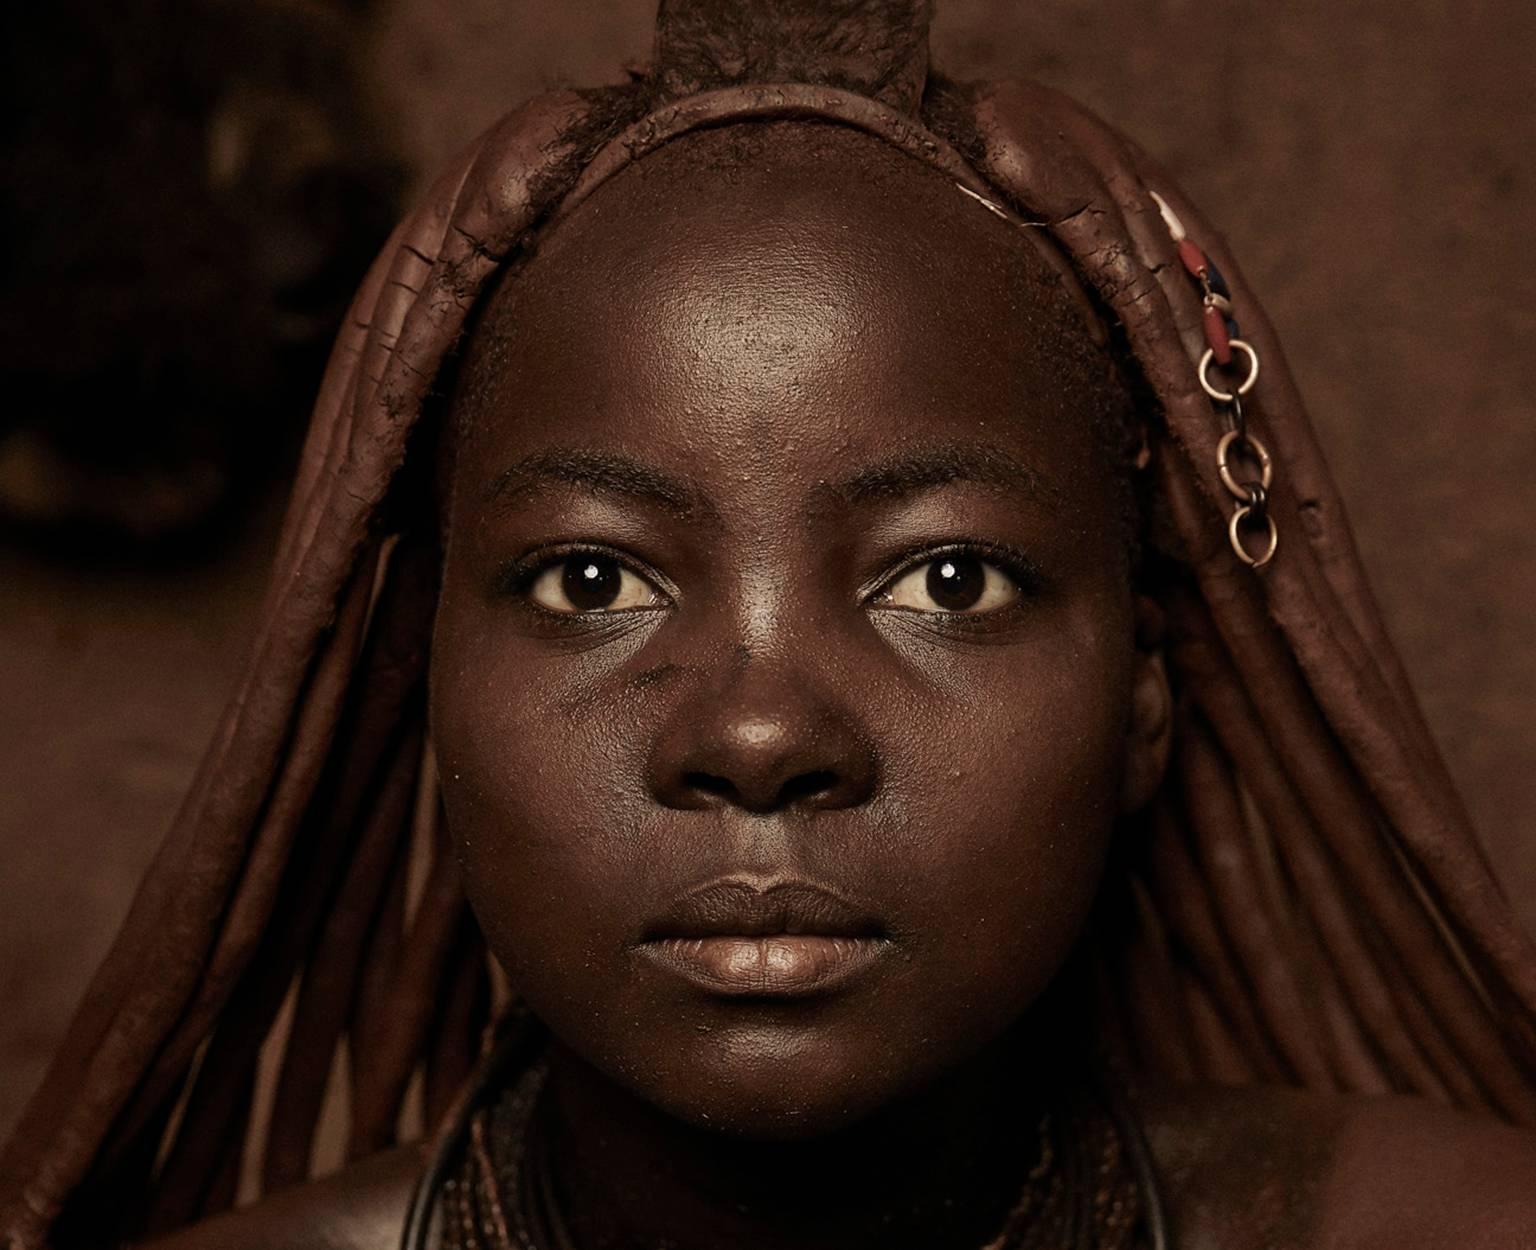 Chris Gordaneer, “Himba Woman Epupa Falls 14, Namibia, 2016.
Chromogenic C Print, 30 x 20”, Edition of 7.
Signed, Dated and Numbered on the Reverse.

Shipping Costs to be determined based on service required and location.
